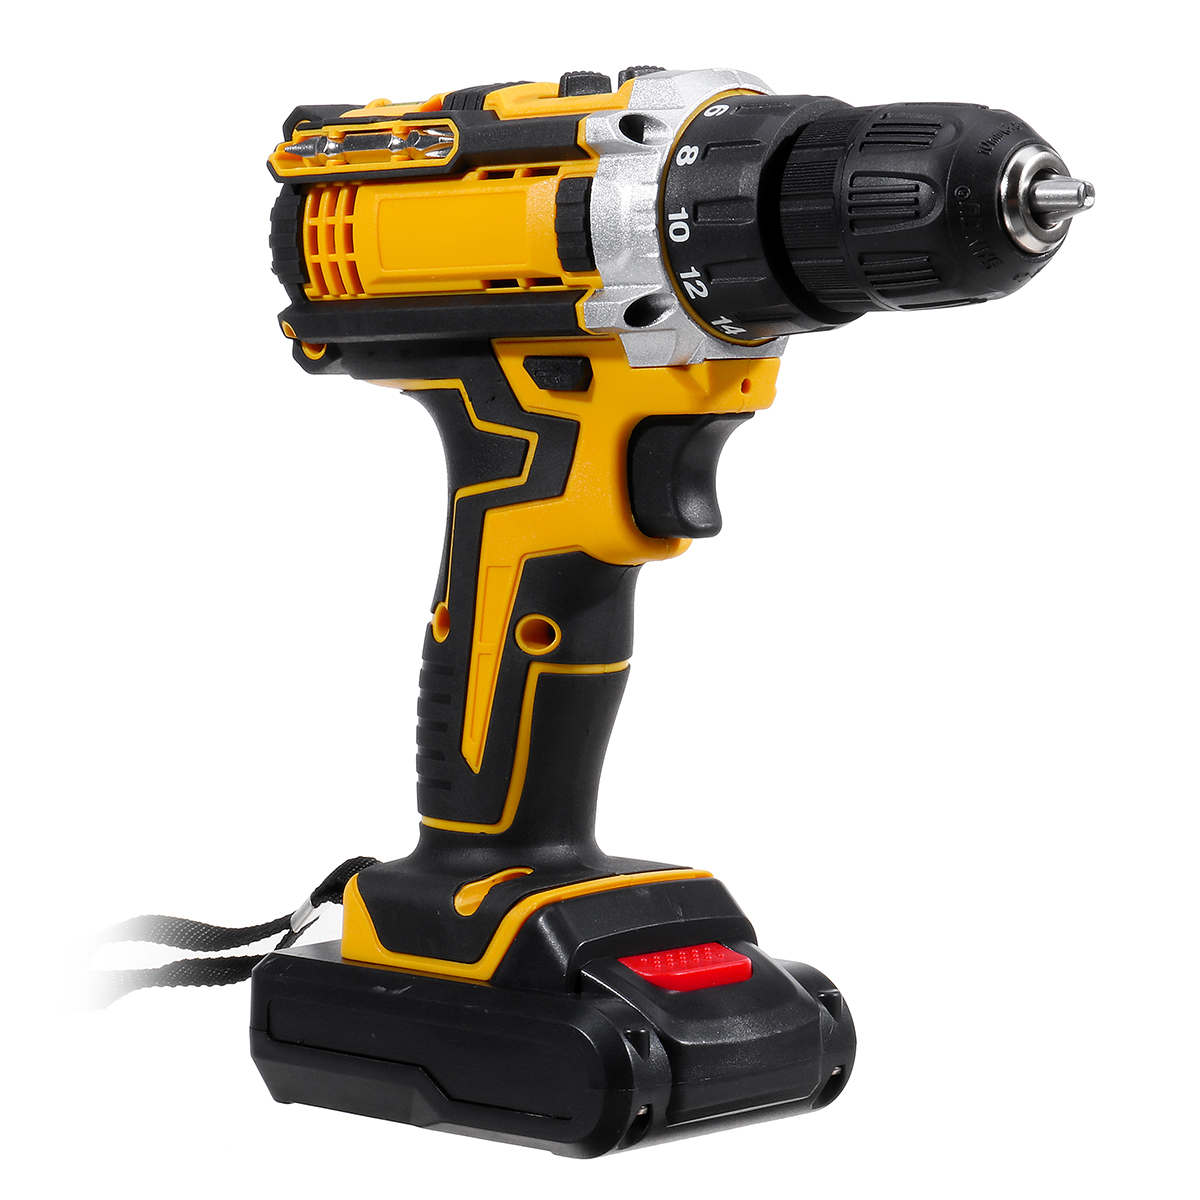 2000rpm-38Nm-21V-Lithium-Electric-Impact-Hammer-Drill-Wood-Drilling-Screwdrivers-with-Battery-1943471-15